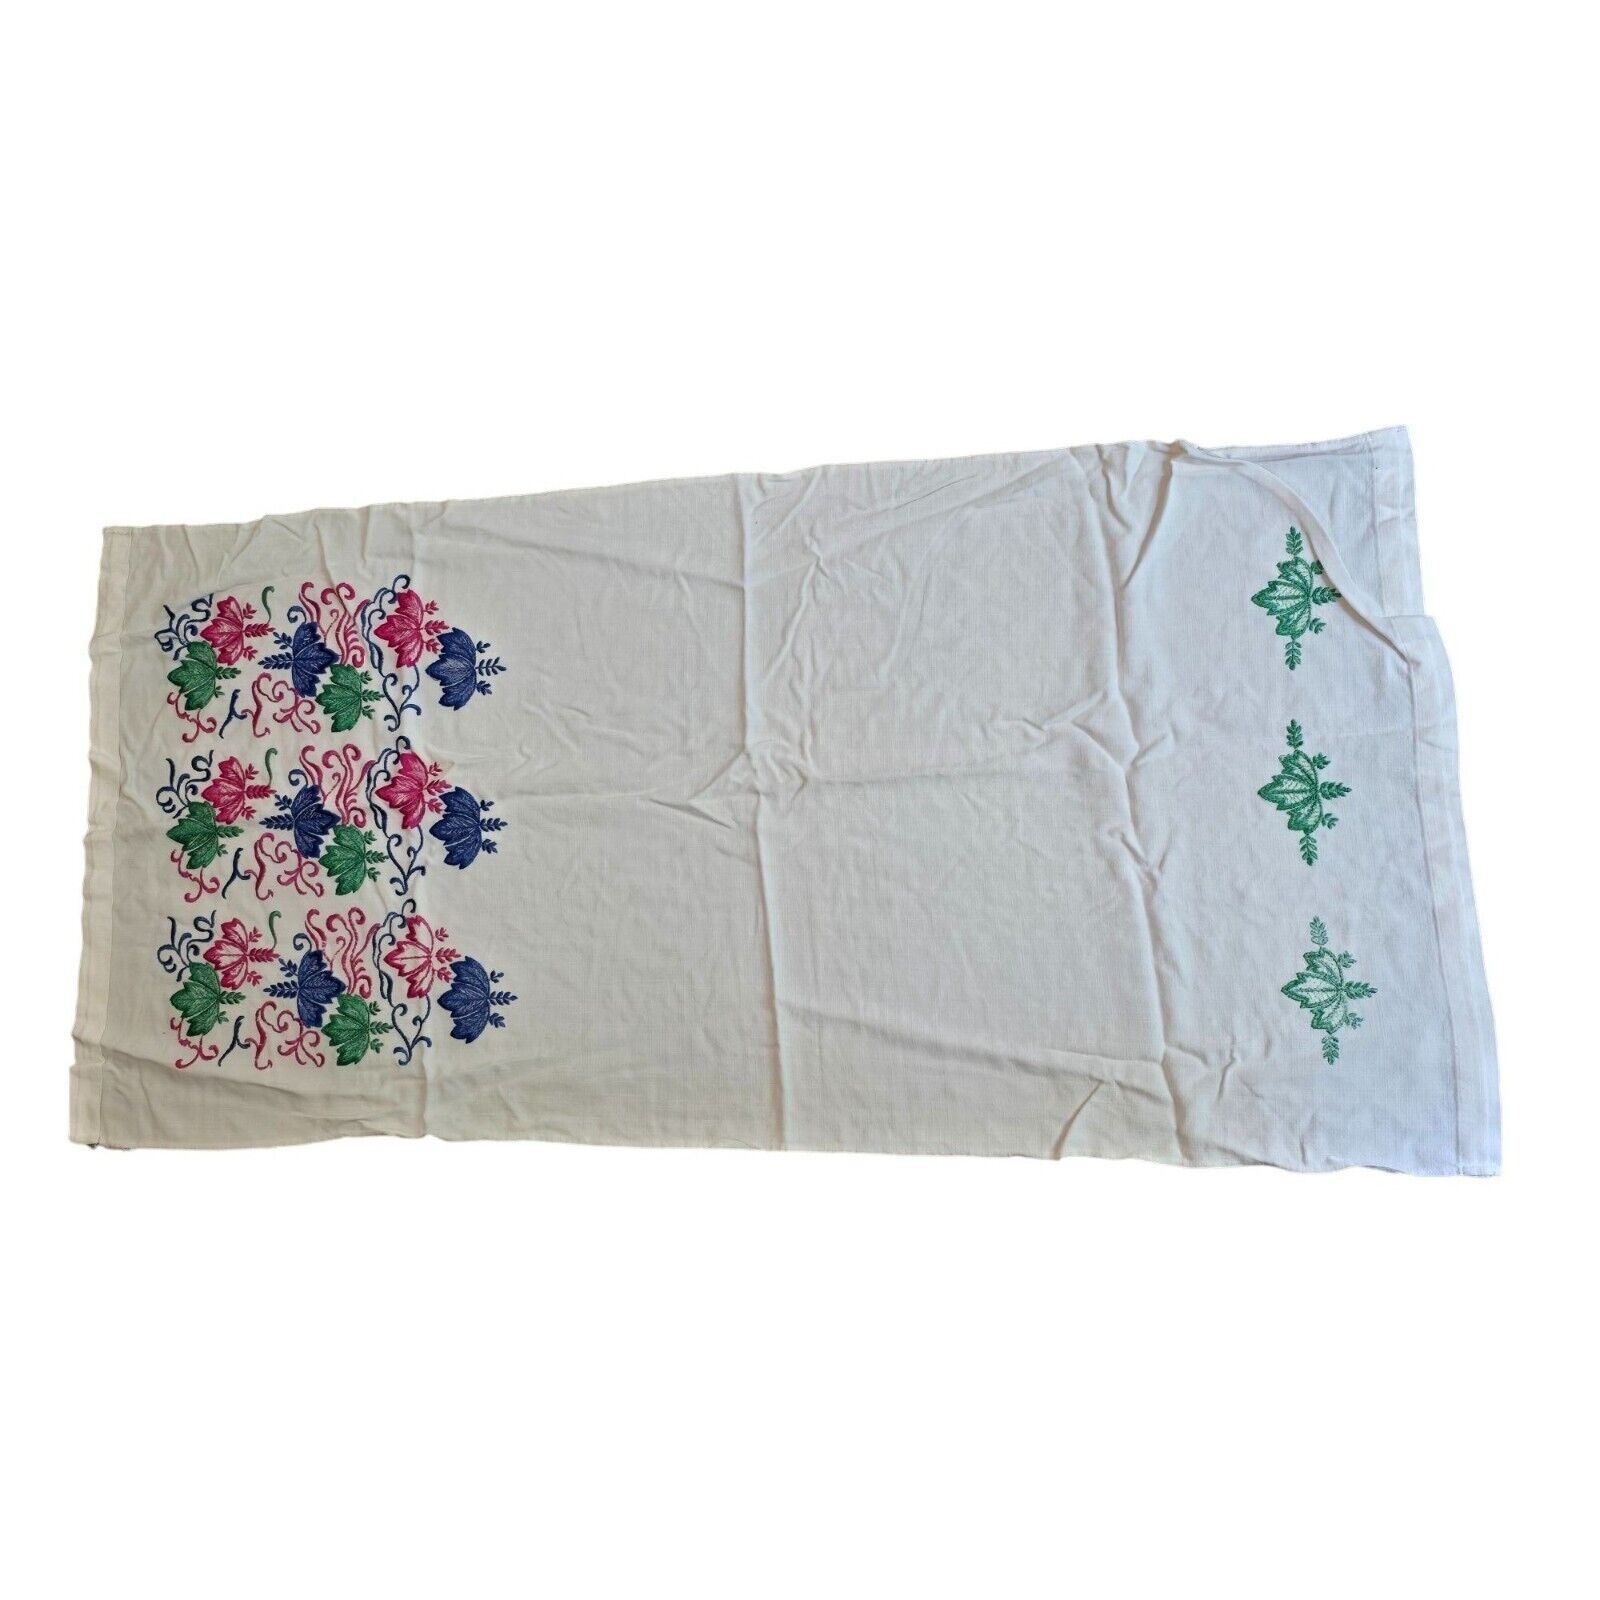 Vintage Hand-Embroidered Floral Table Runner - Abour 60\